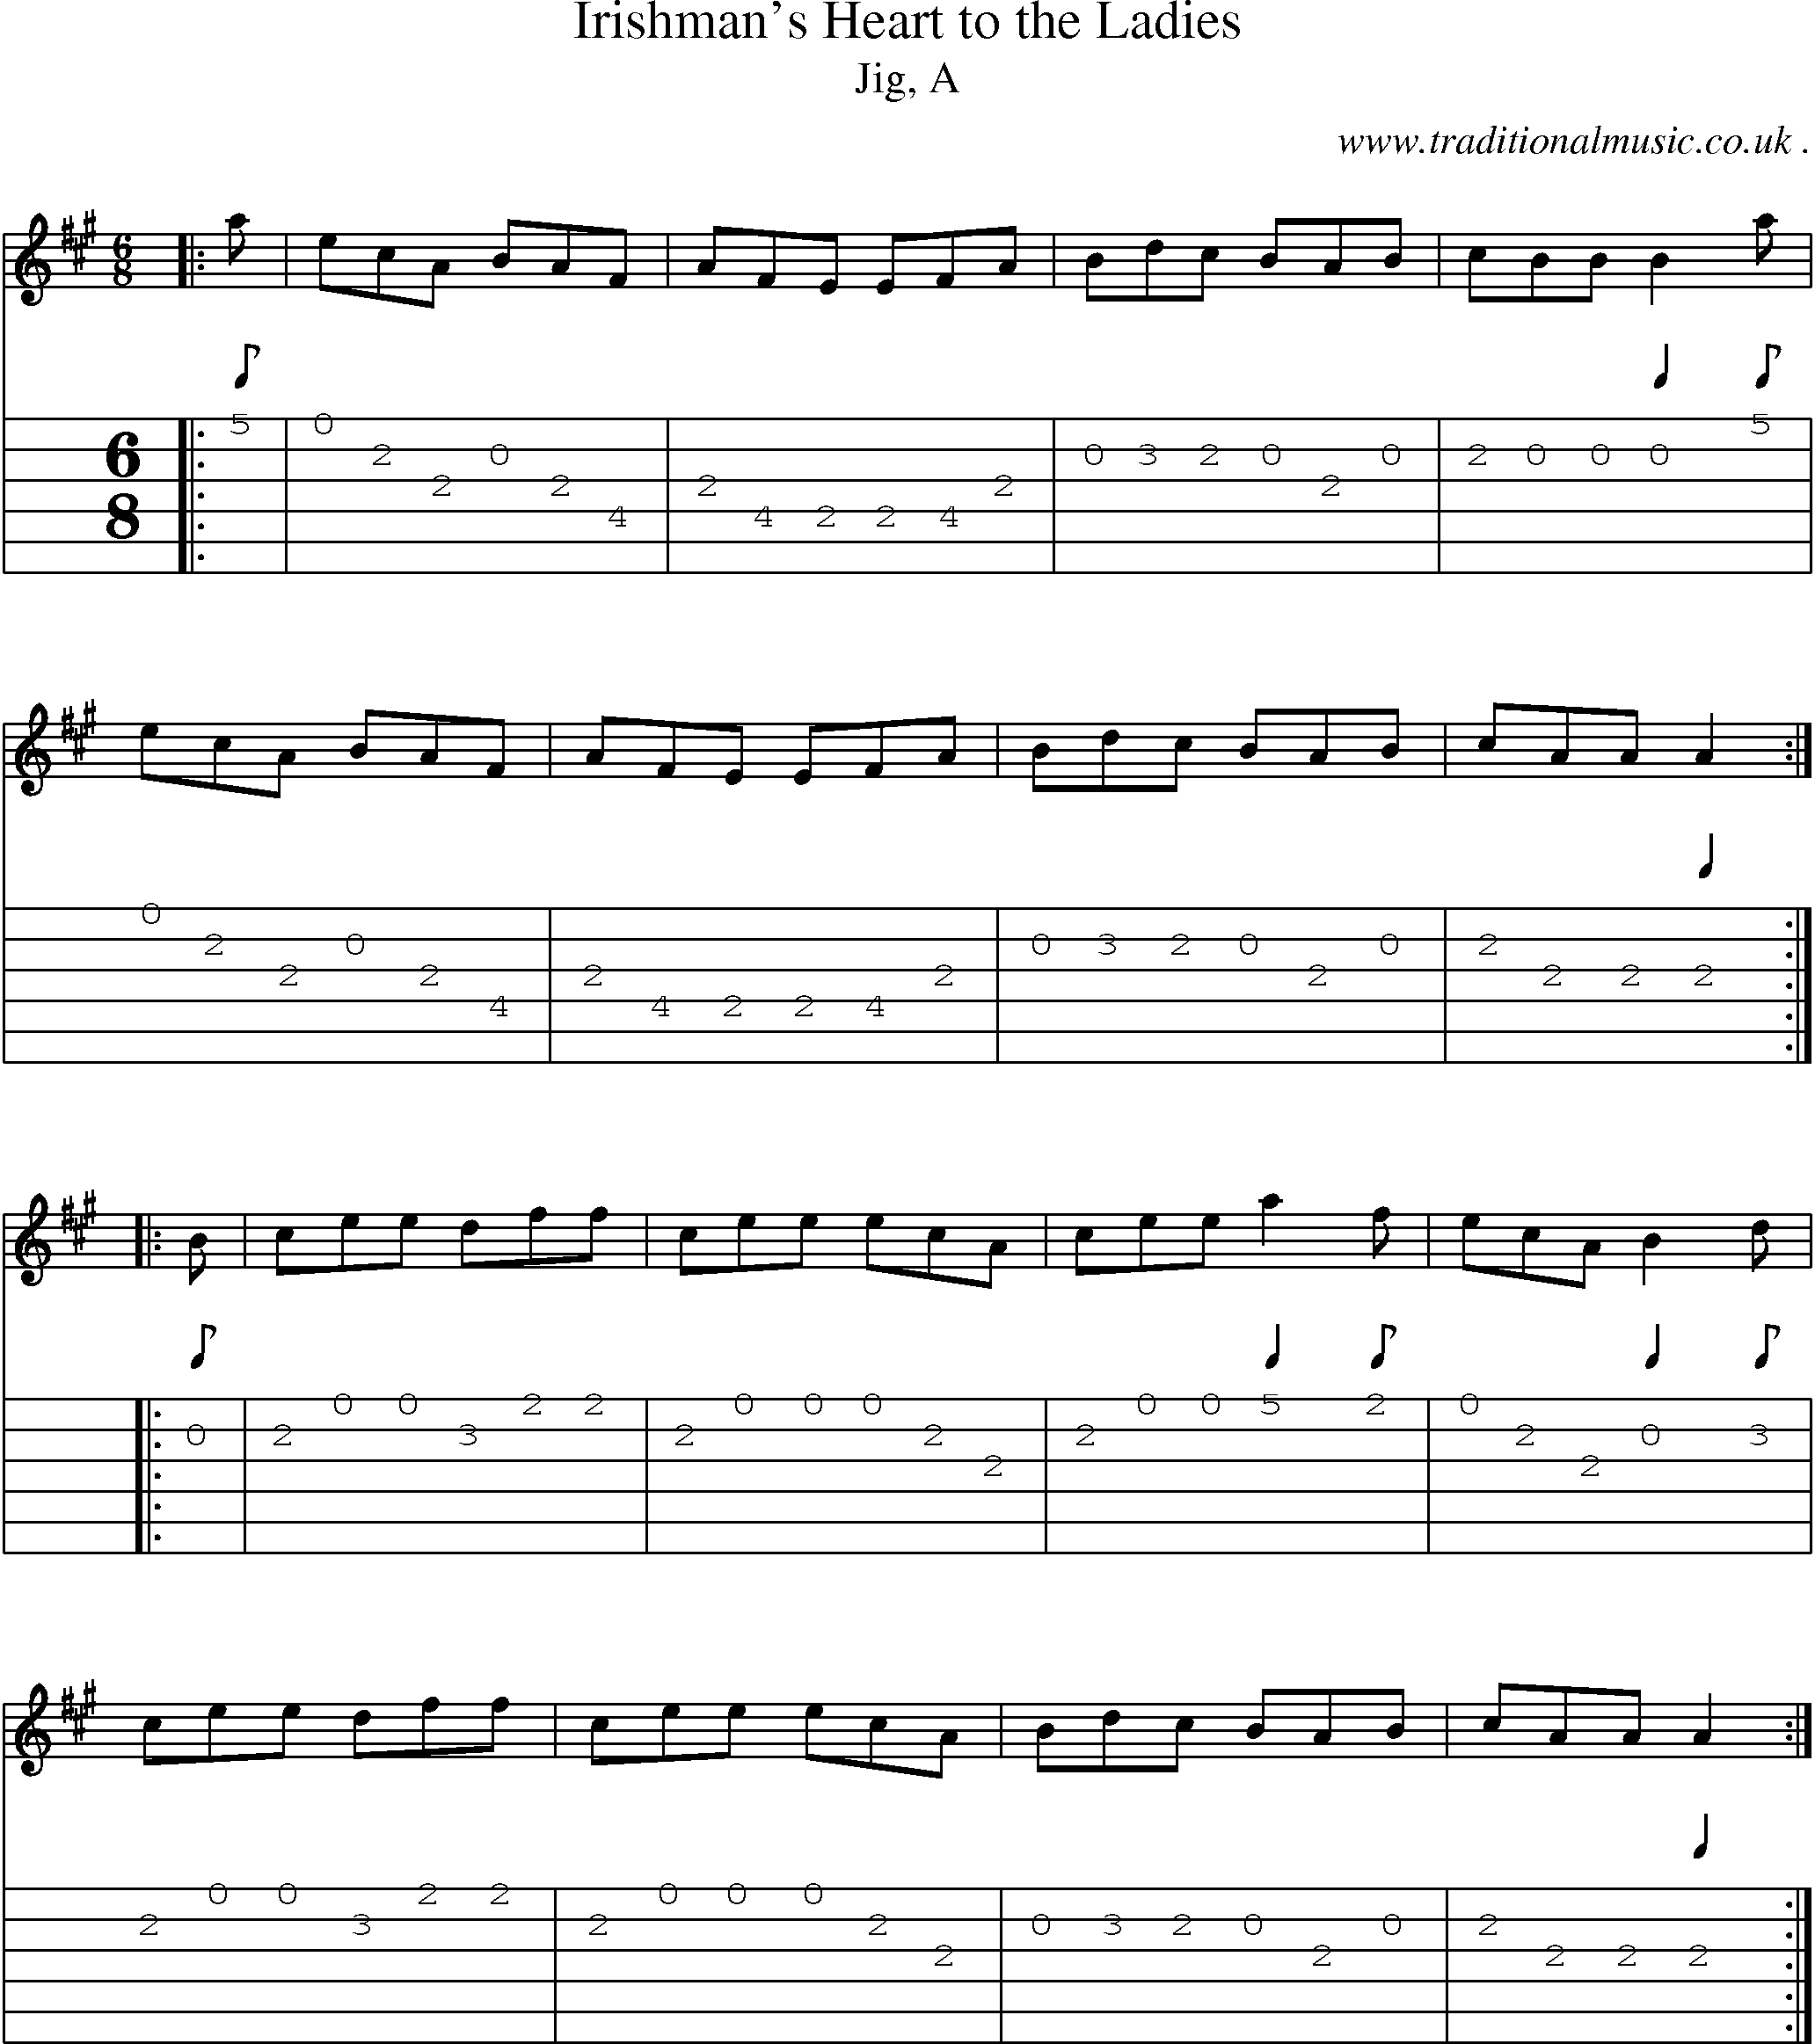 Sheet-music  score, Chords and Guitar Tabs for Irishmans Heart To The Ladies